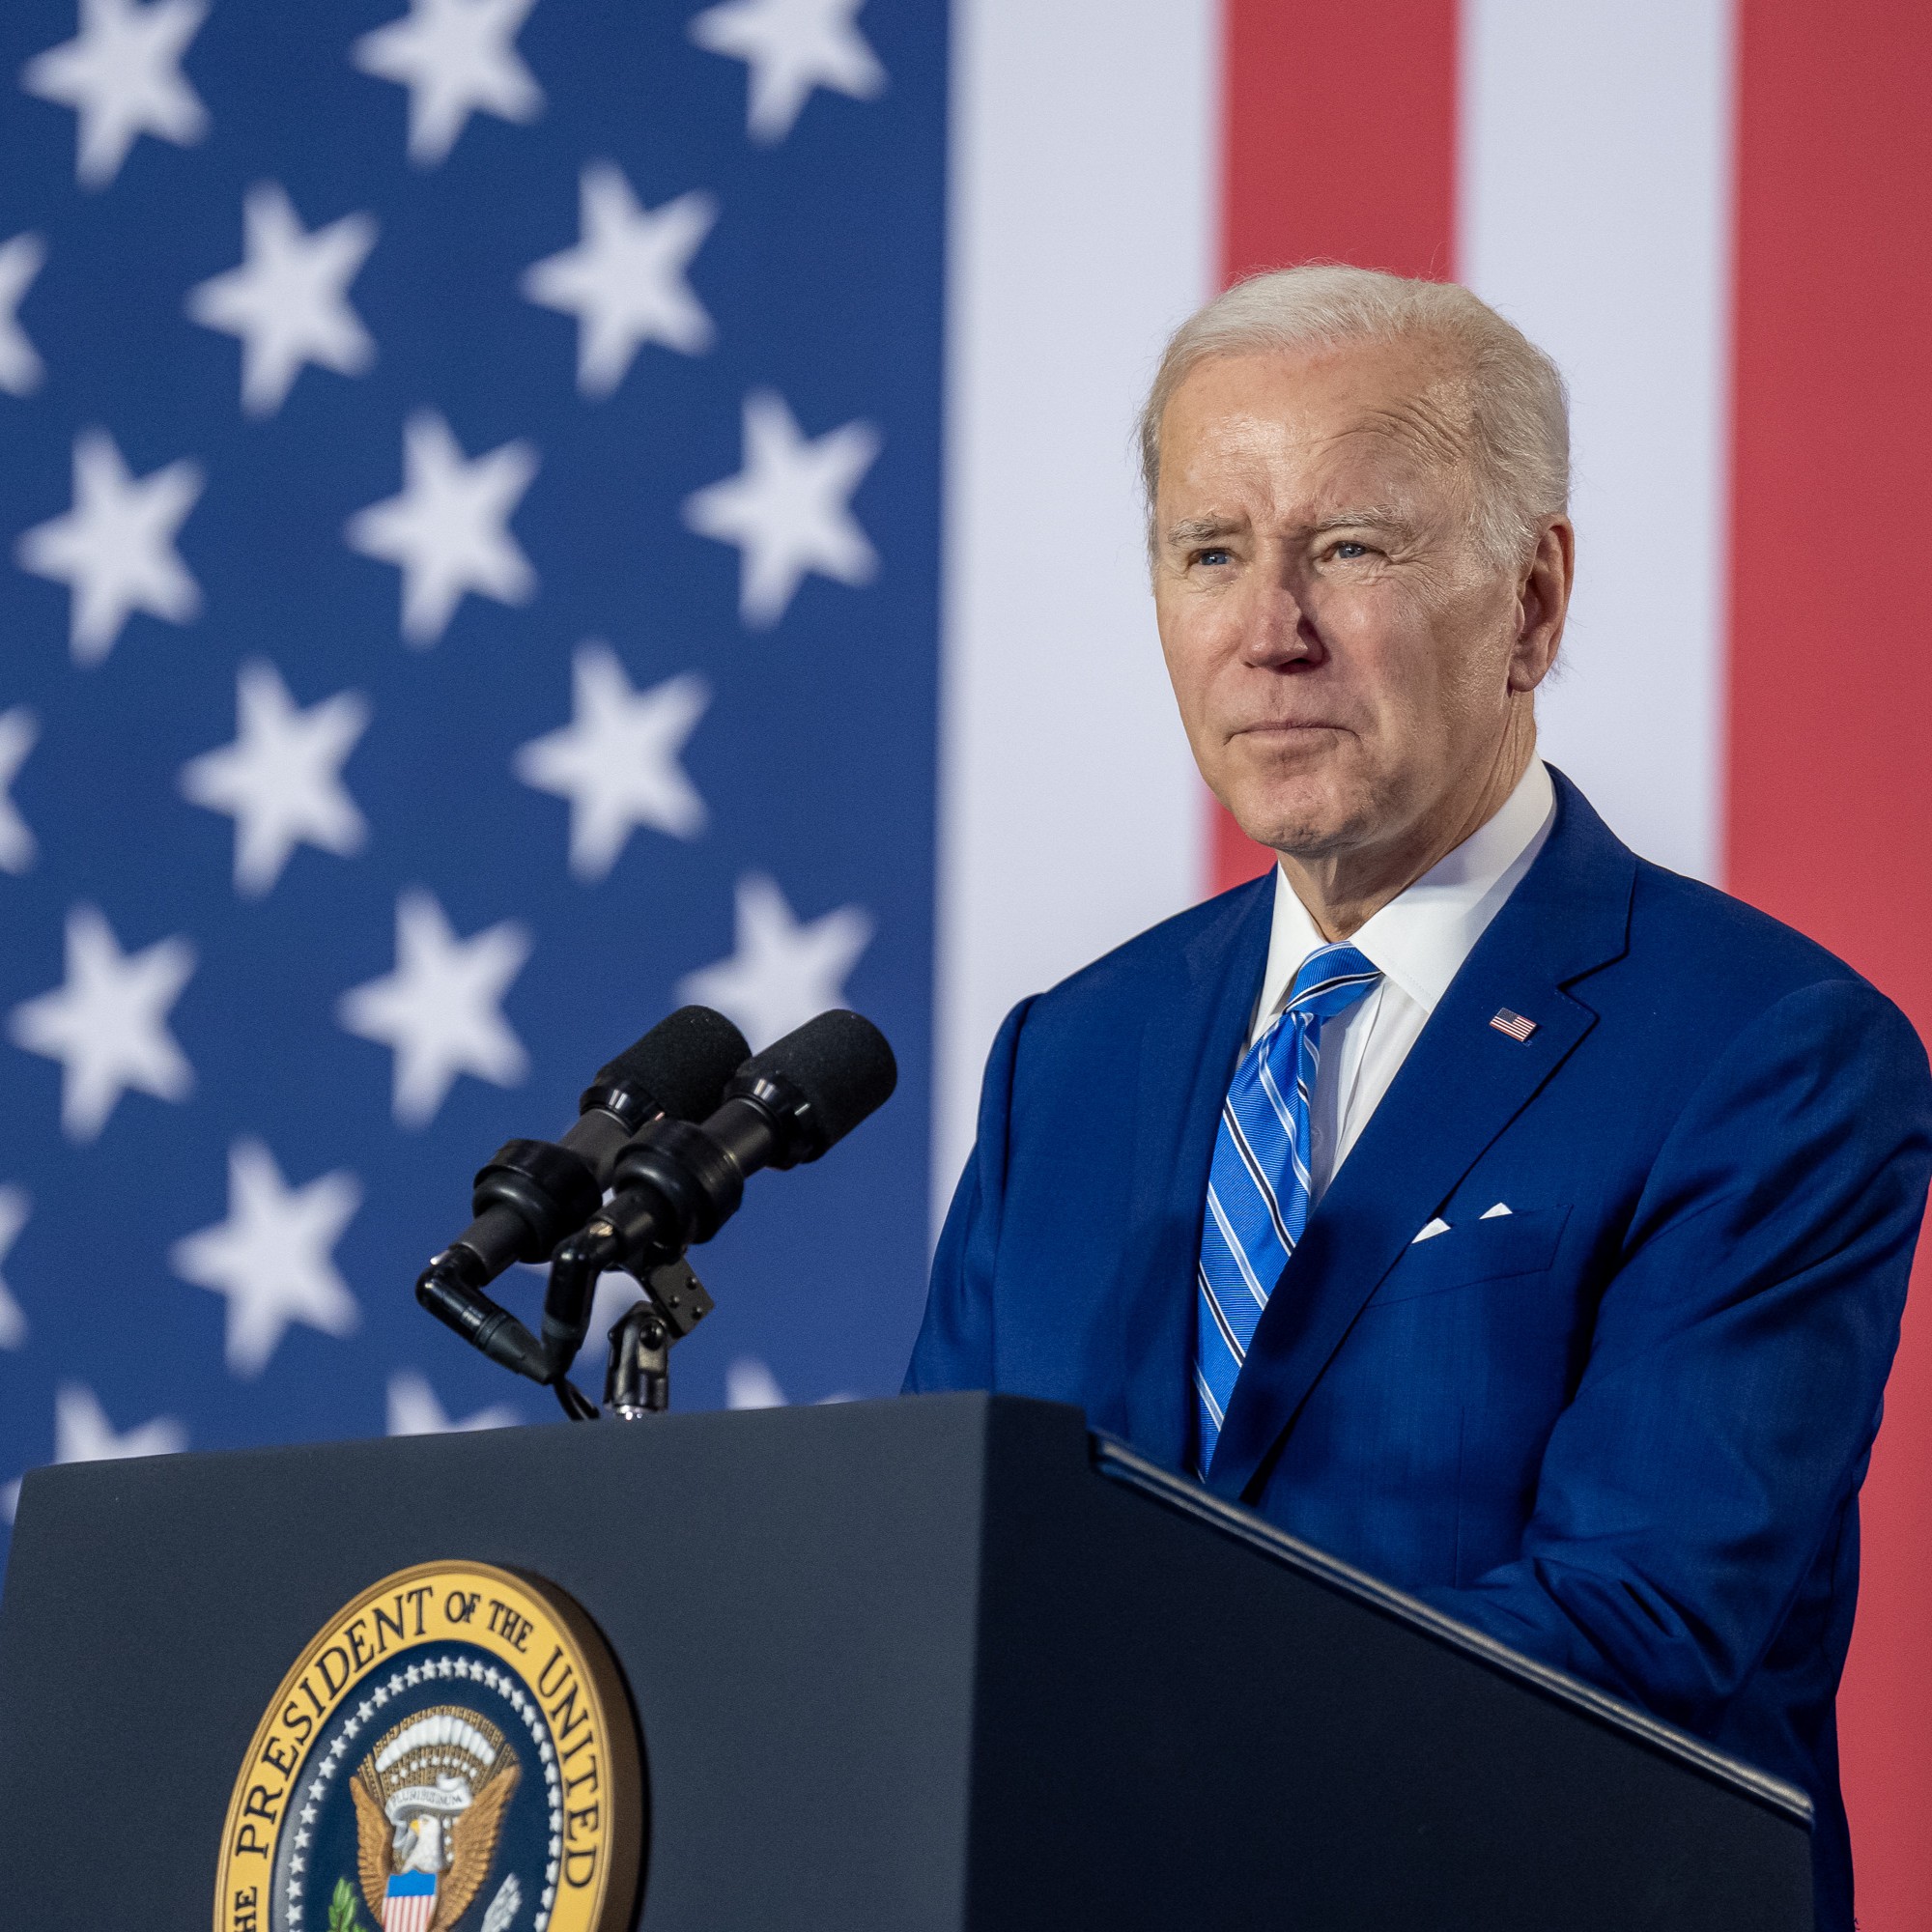 Biden sided with Israel against Palestine